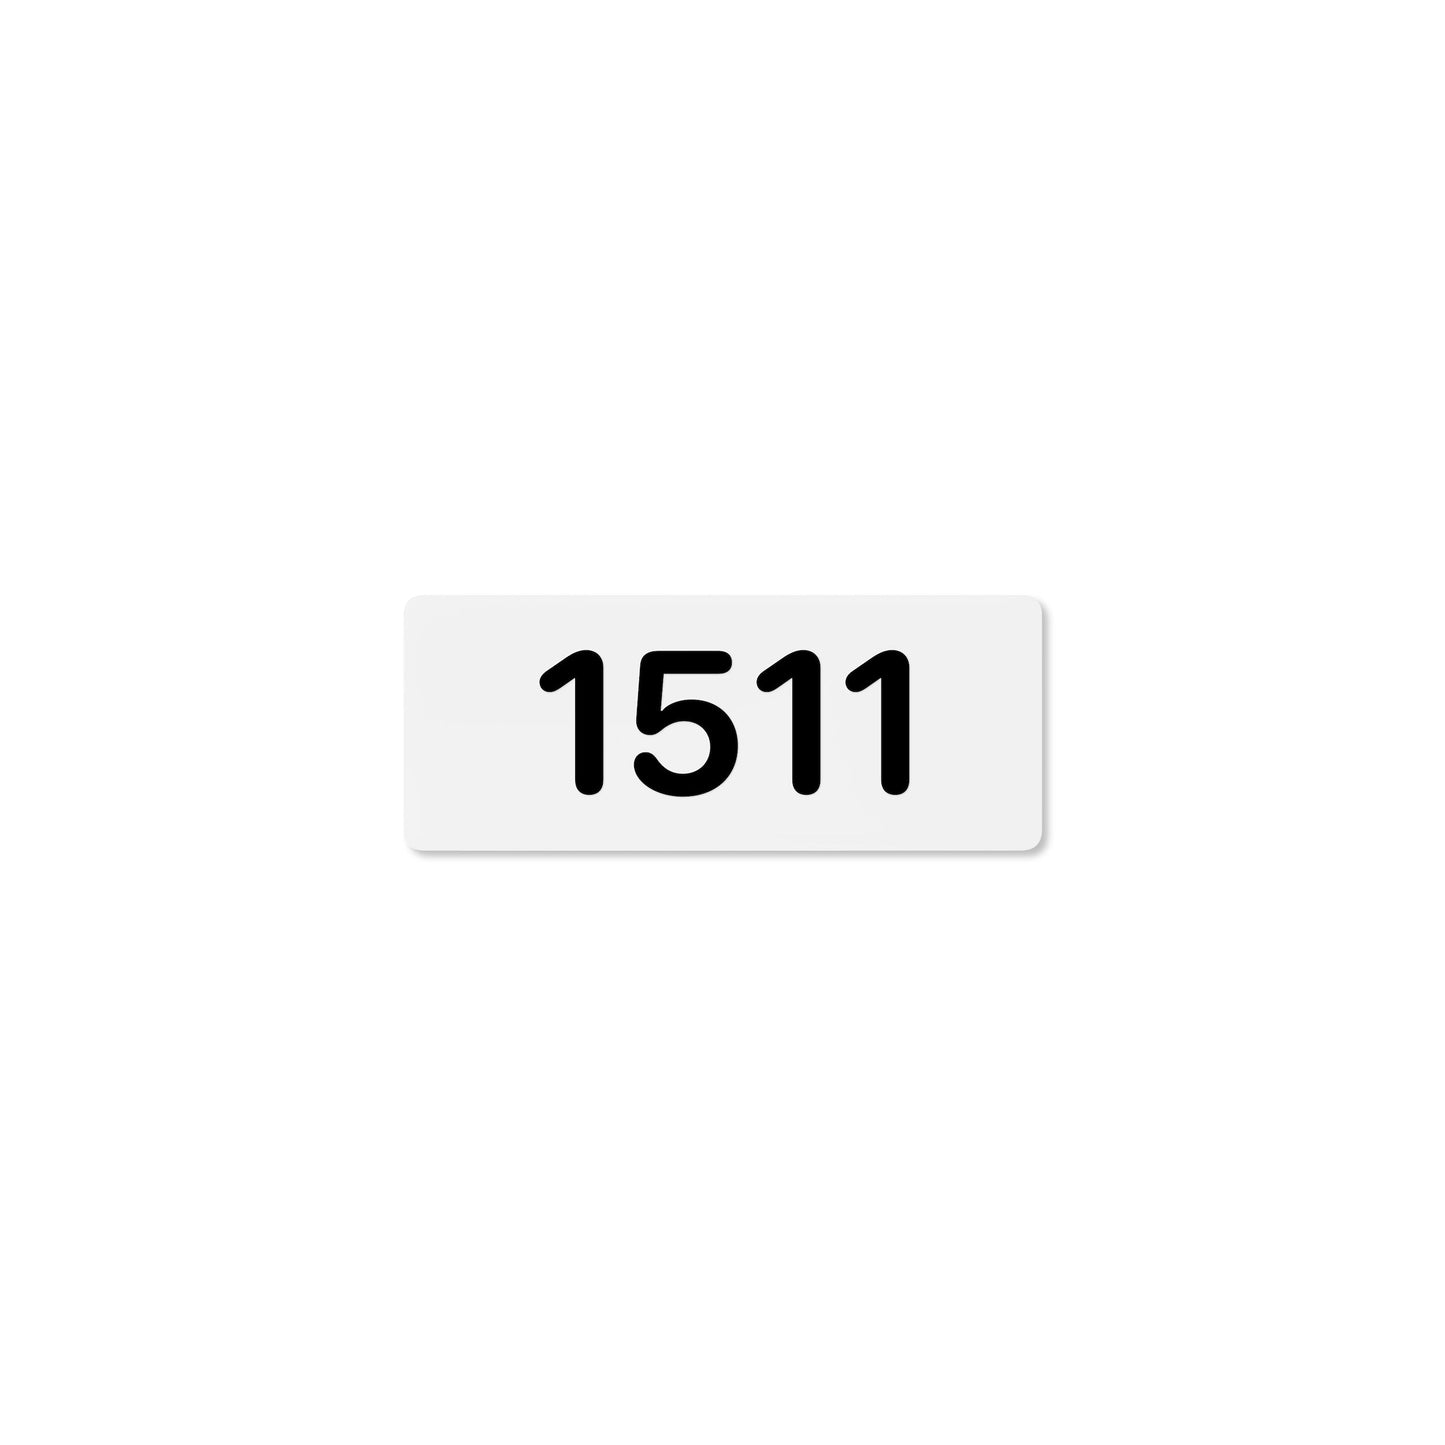 Numeral 1511